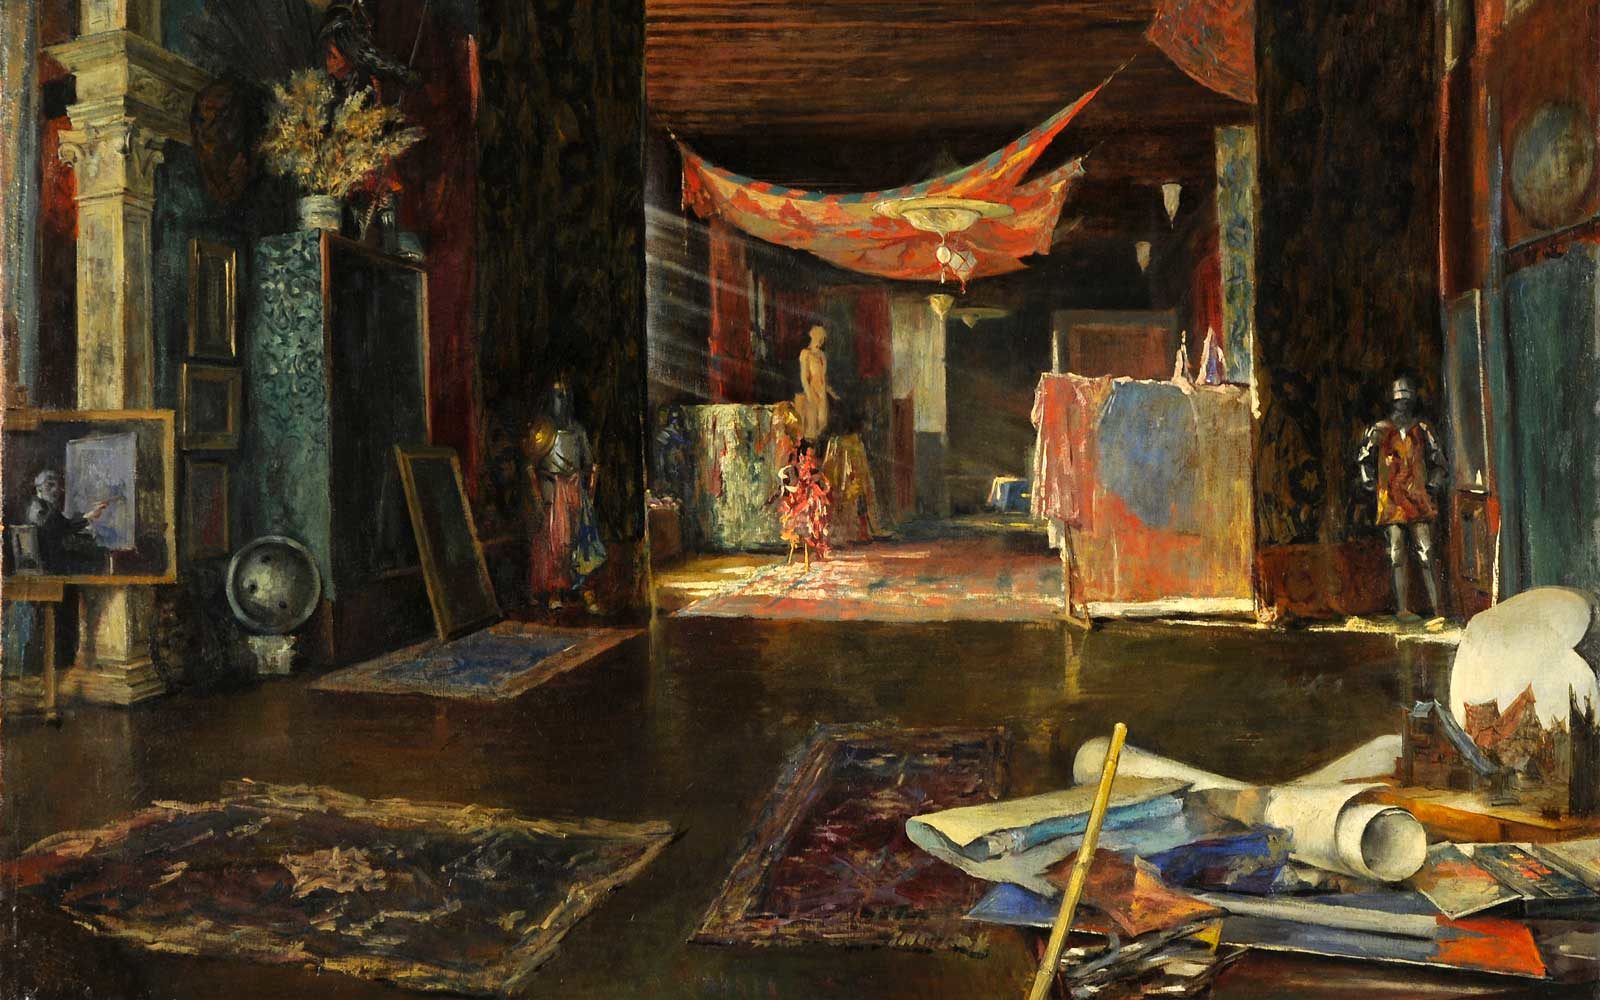 The Fortuny Palace museum painting